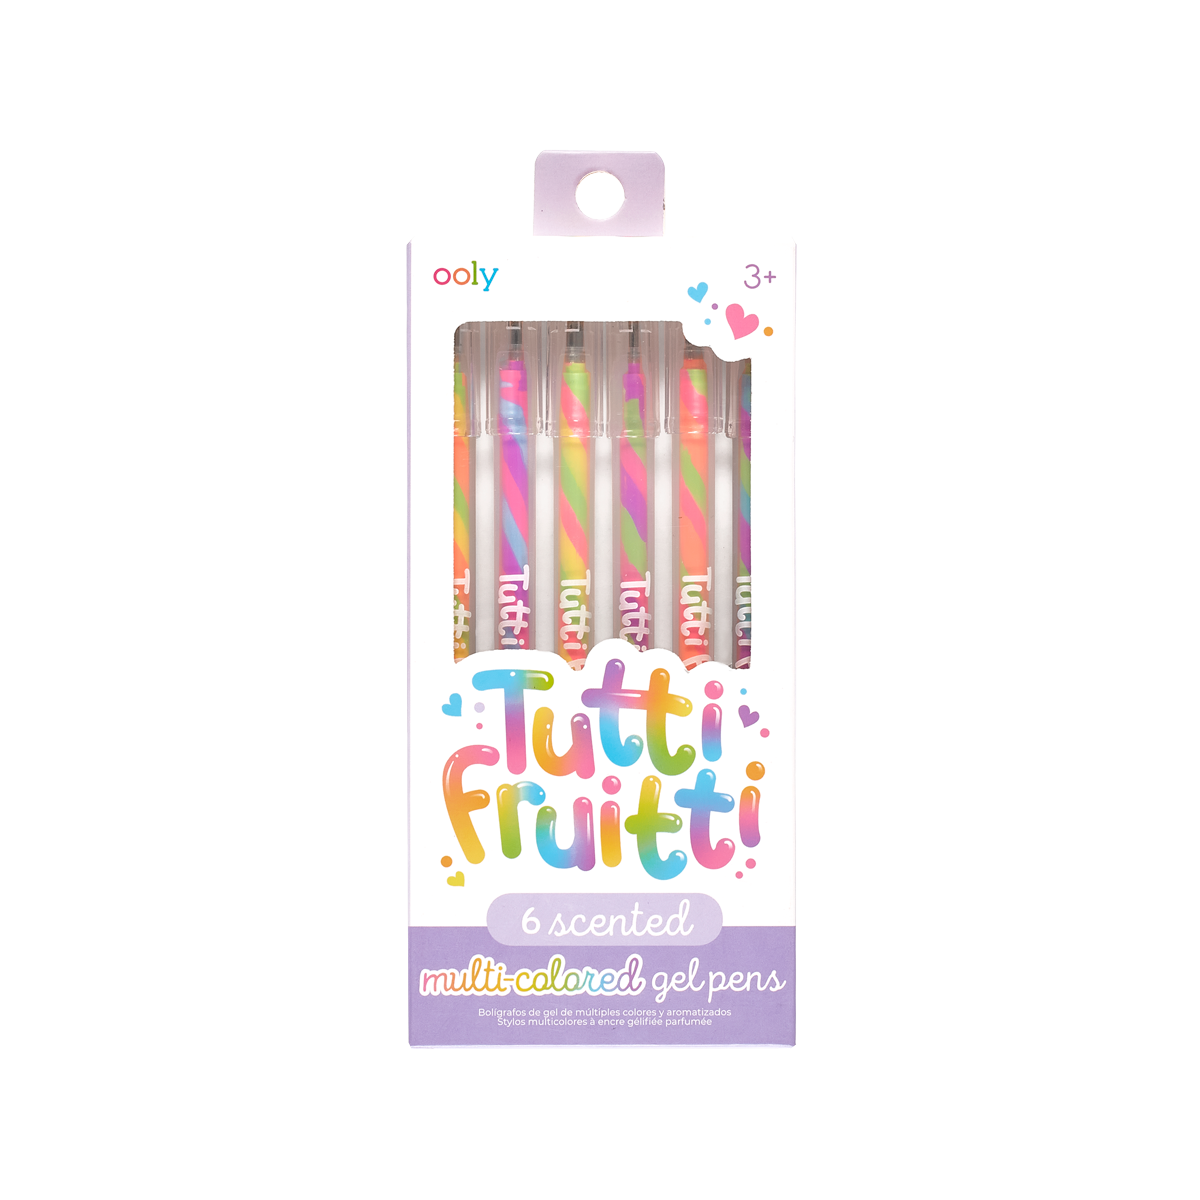 Ooly Yummy Yummy Scented Glitter Gel Pens 2.0 - Set of 12 Colors